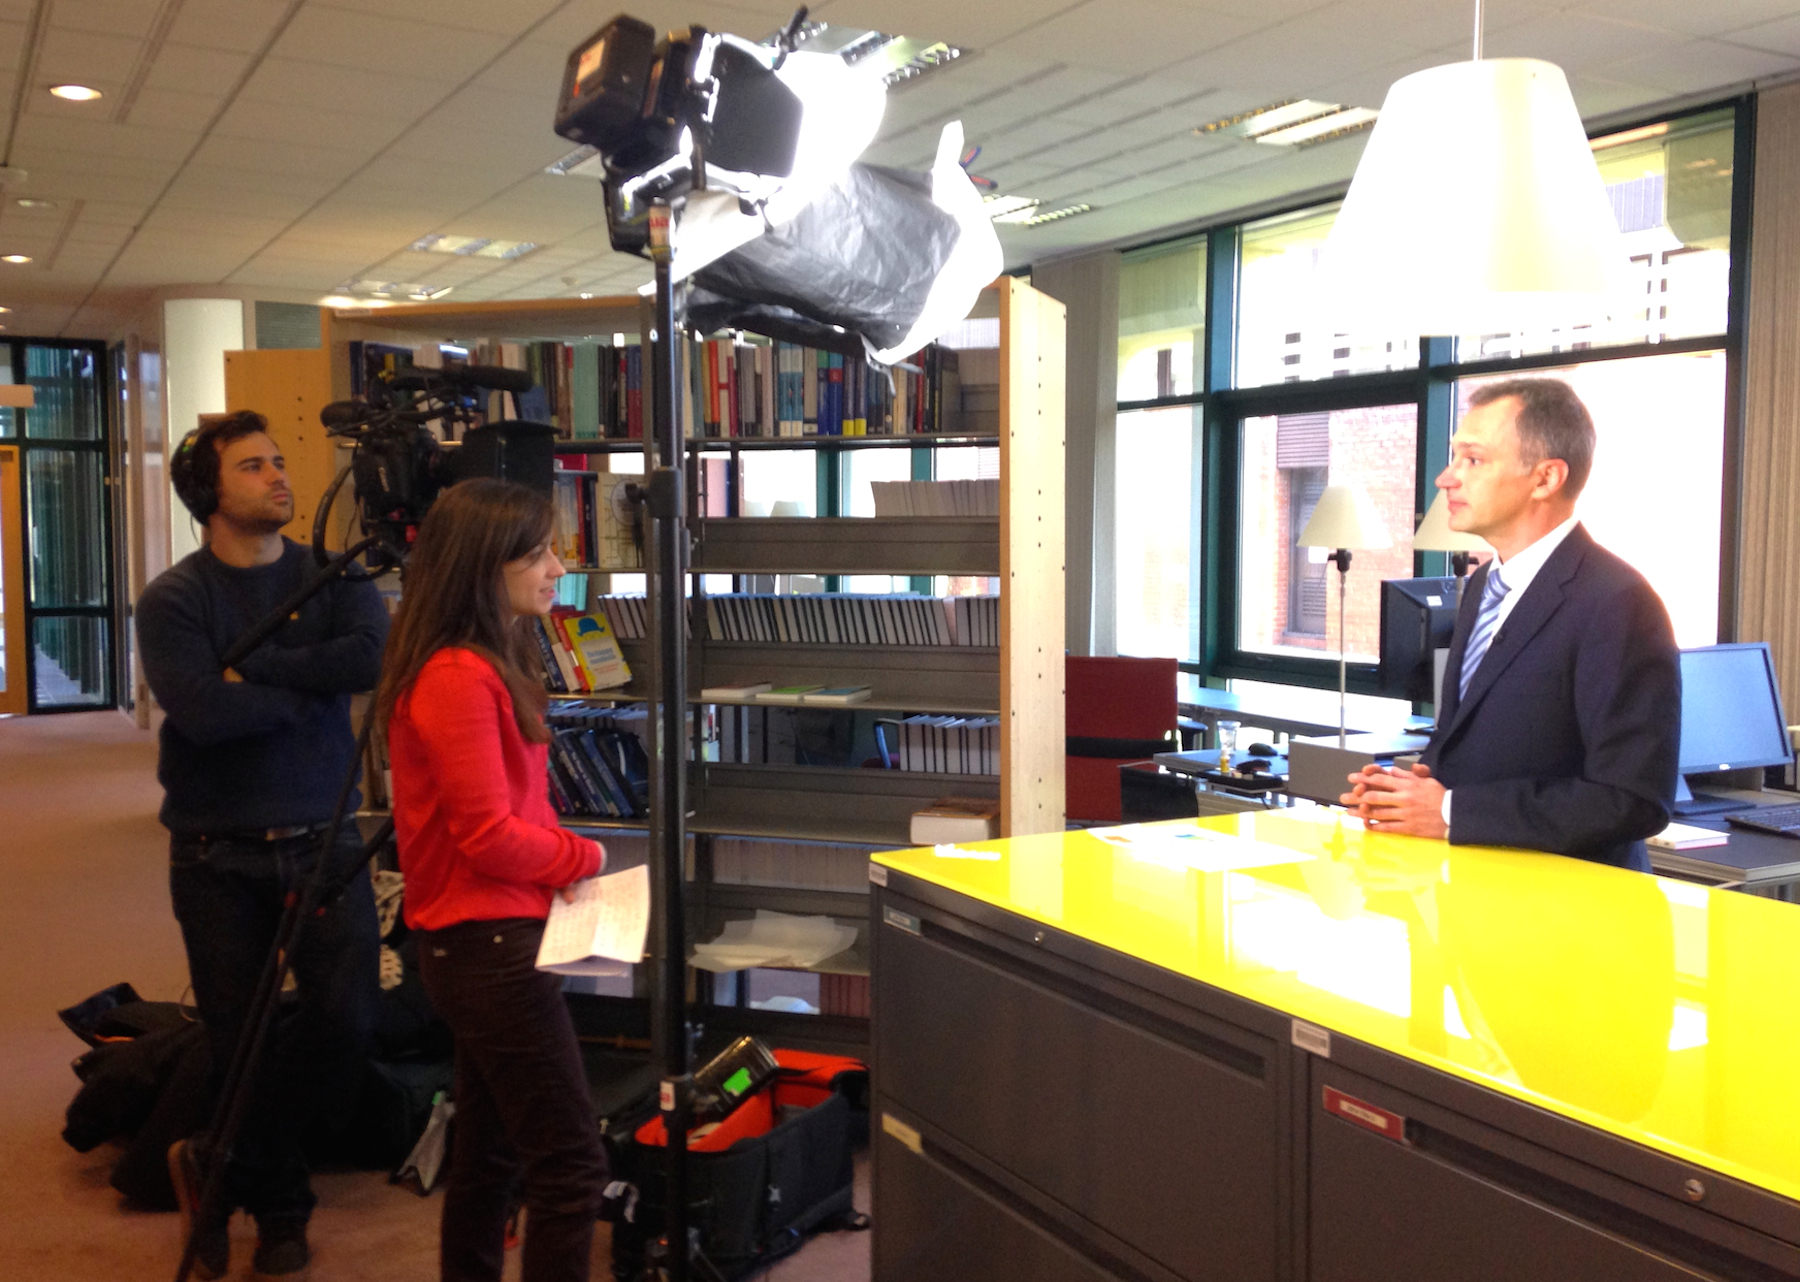 Fanny Gauret of Euronews’ Real Economy programme, interviewing Massimiliano Mascherini on research relating to the implementation of the Youth Guarantee in Europe. (c) Eurofound 2015, Mans Martensson, Eurofound.